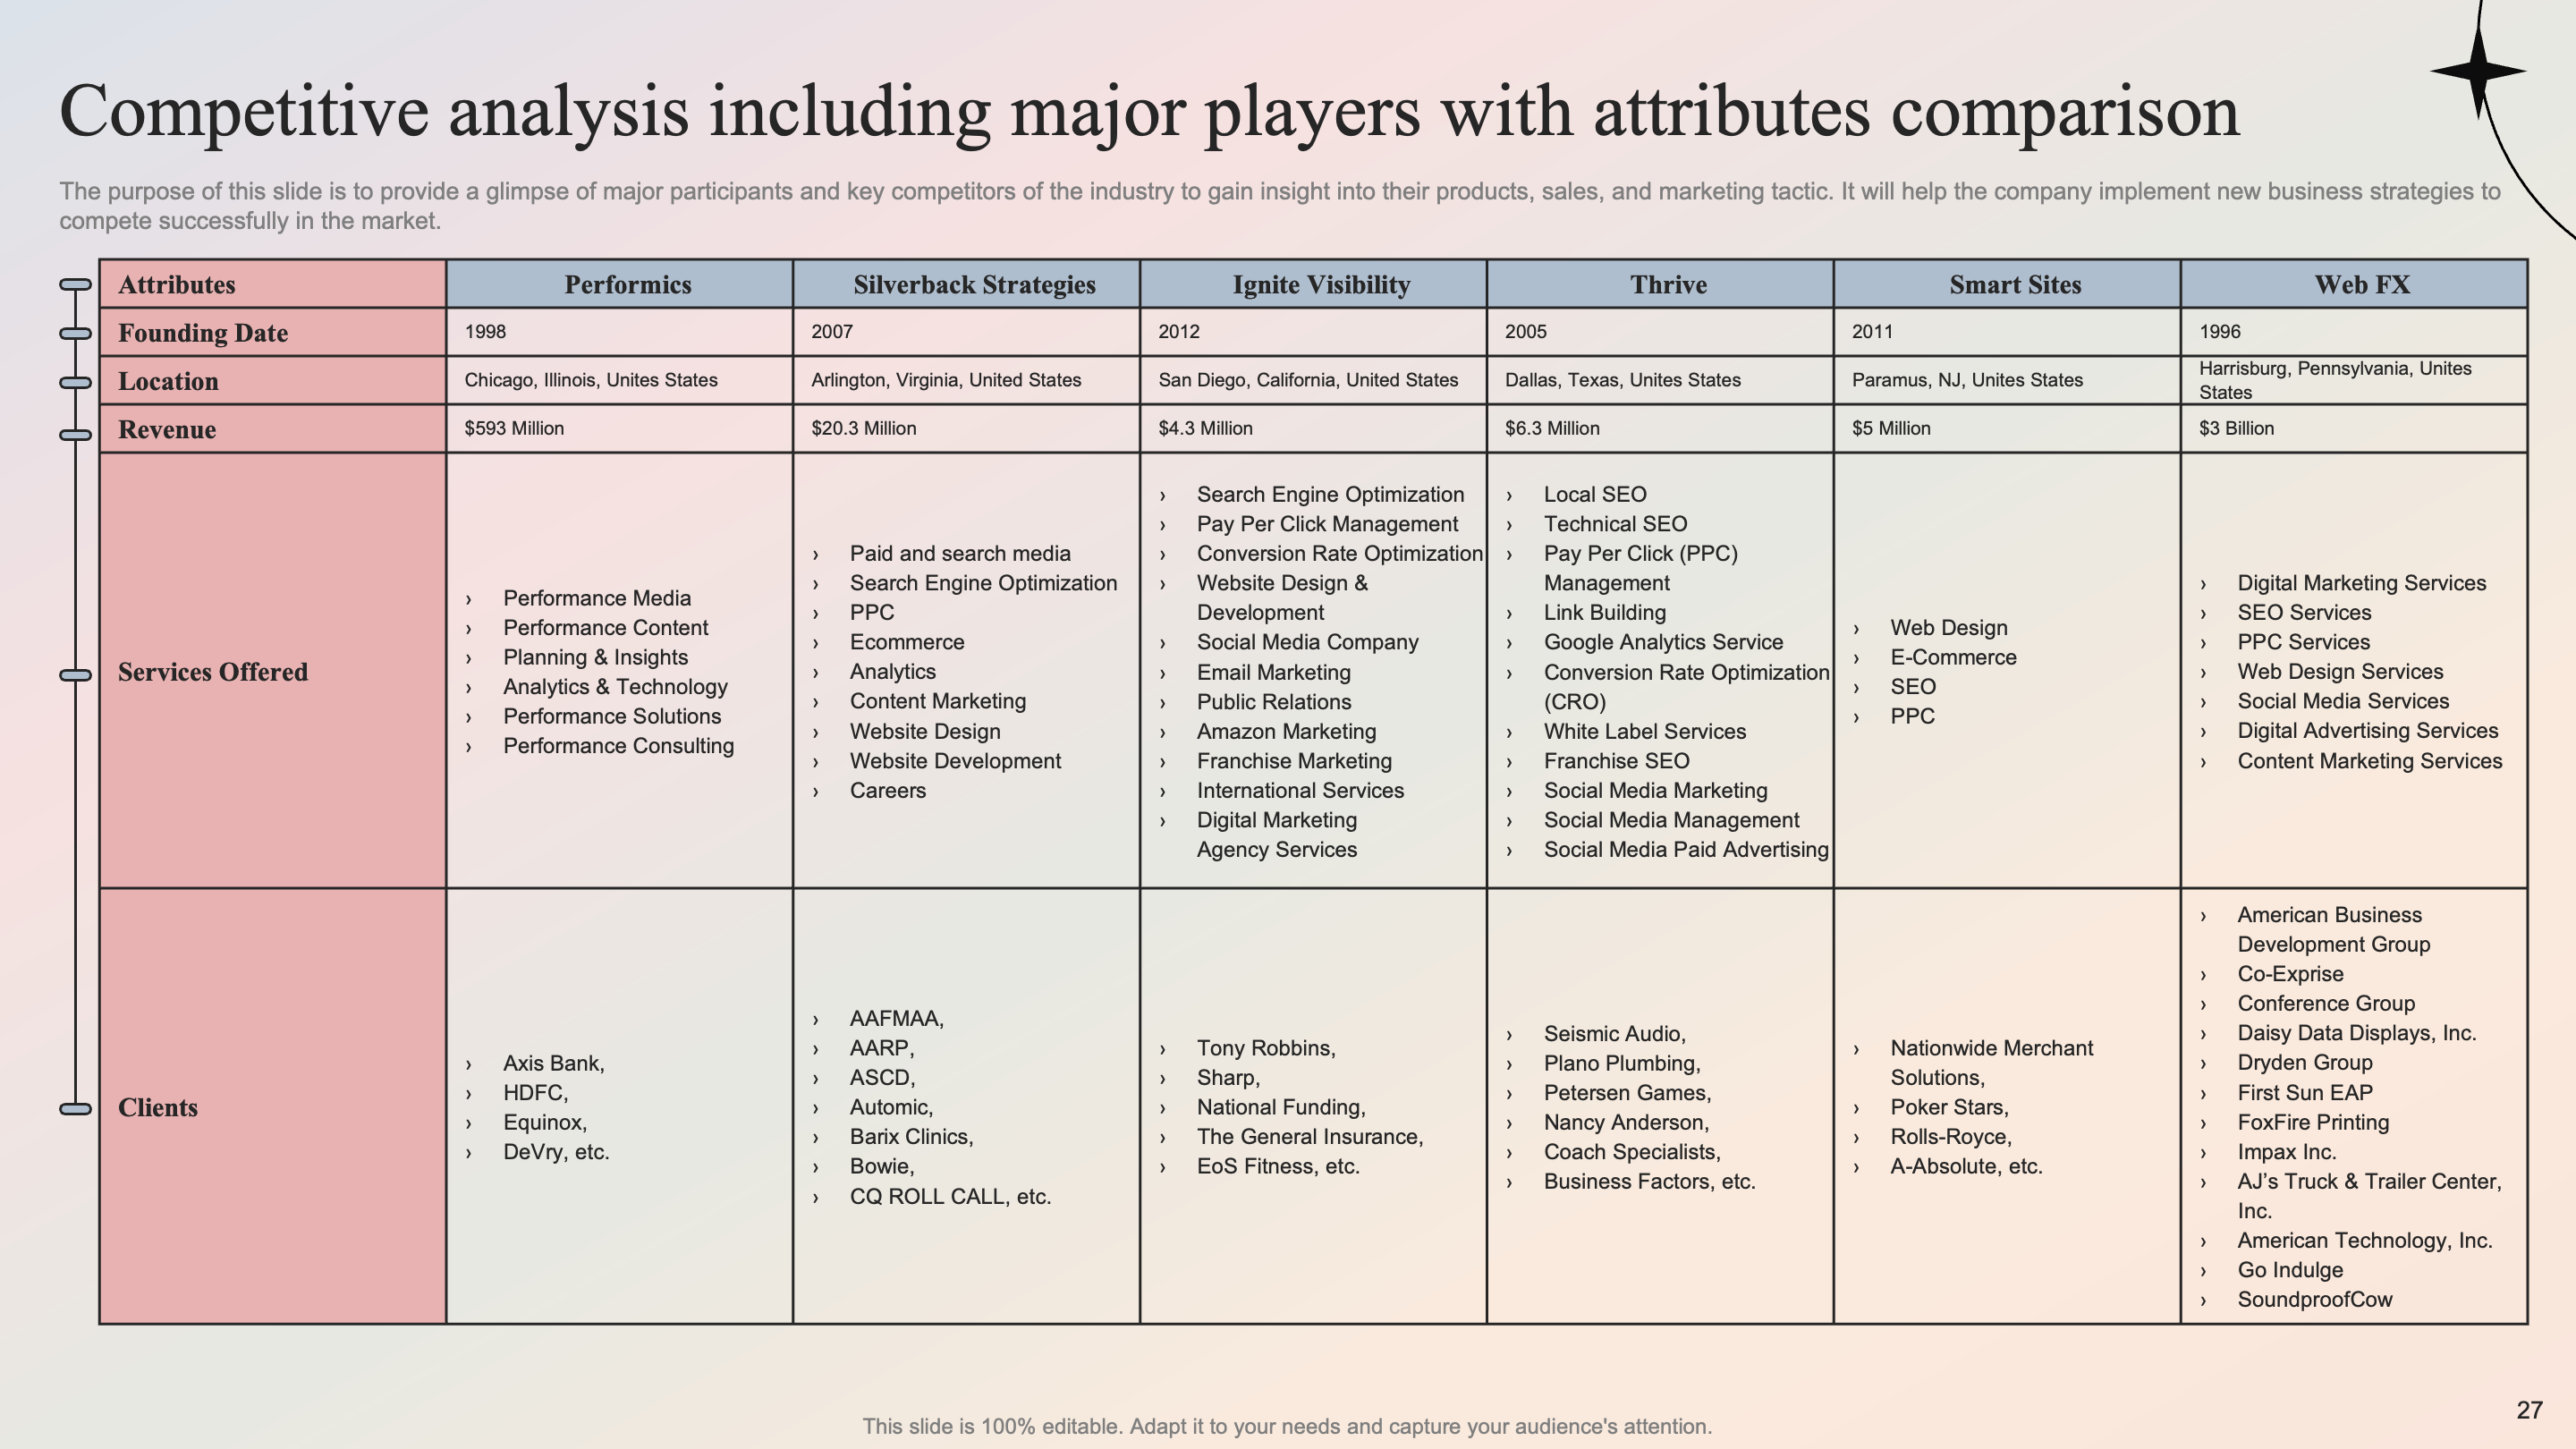 Competitive Analysis Including Major Players With Attributes Comparison